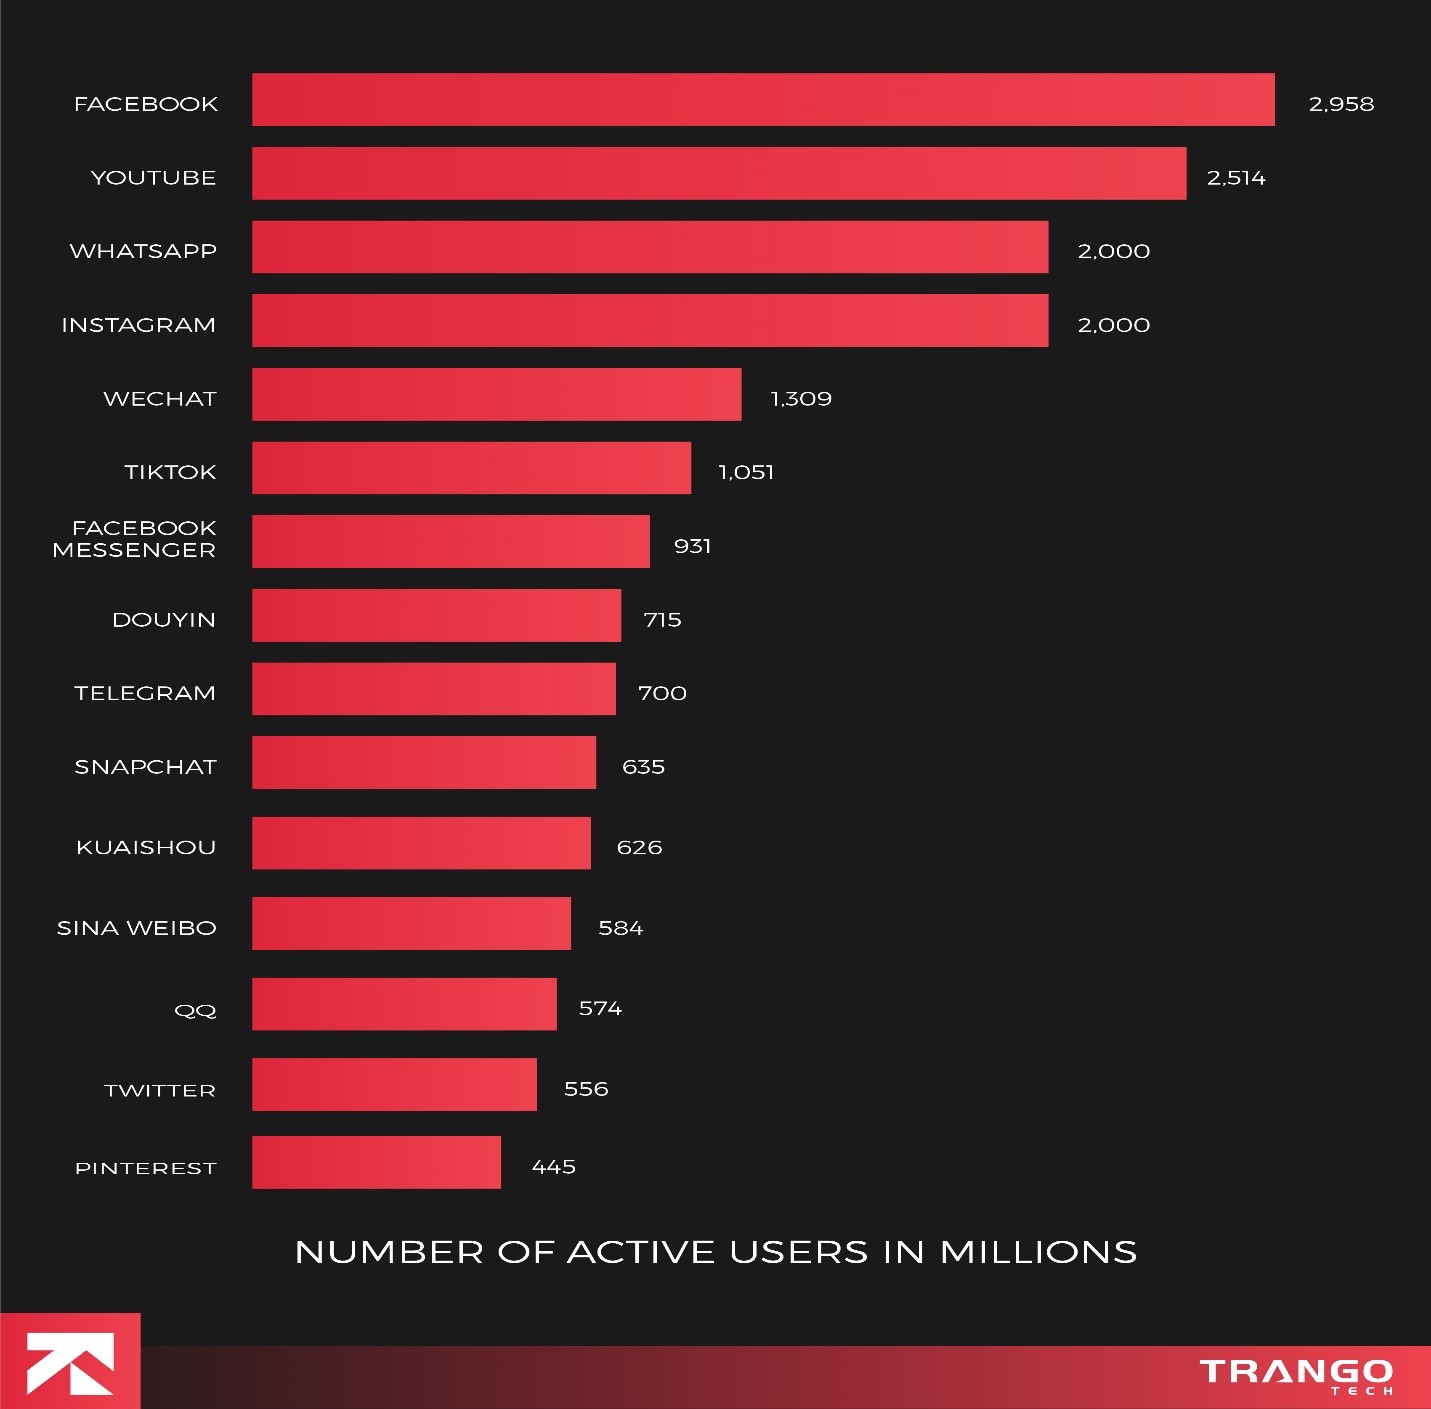 number of active users as per platform